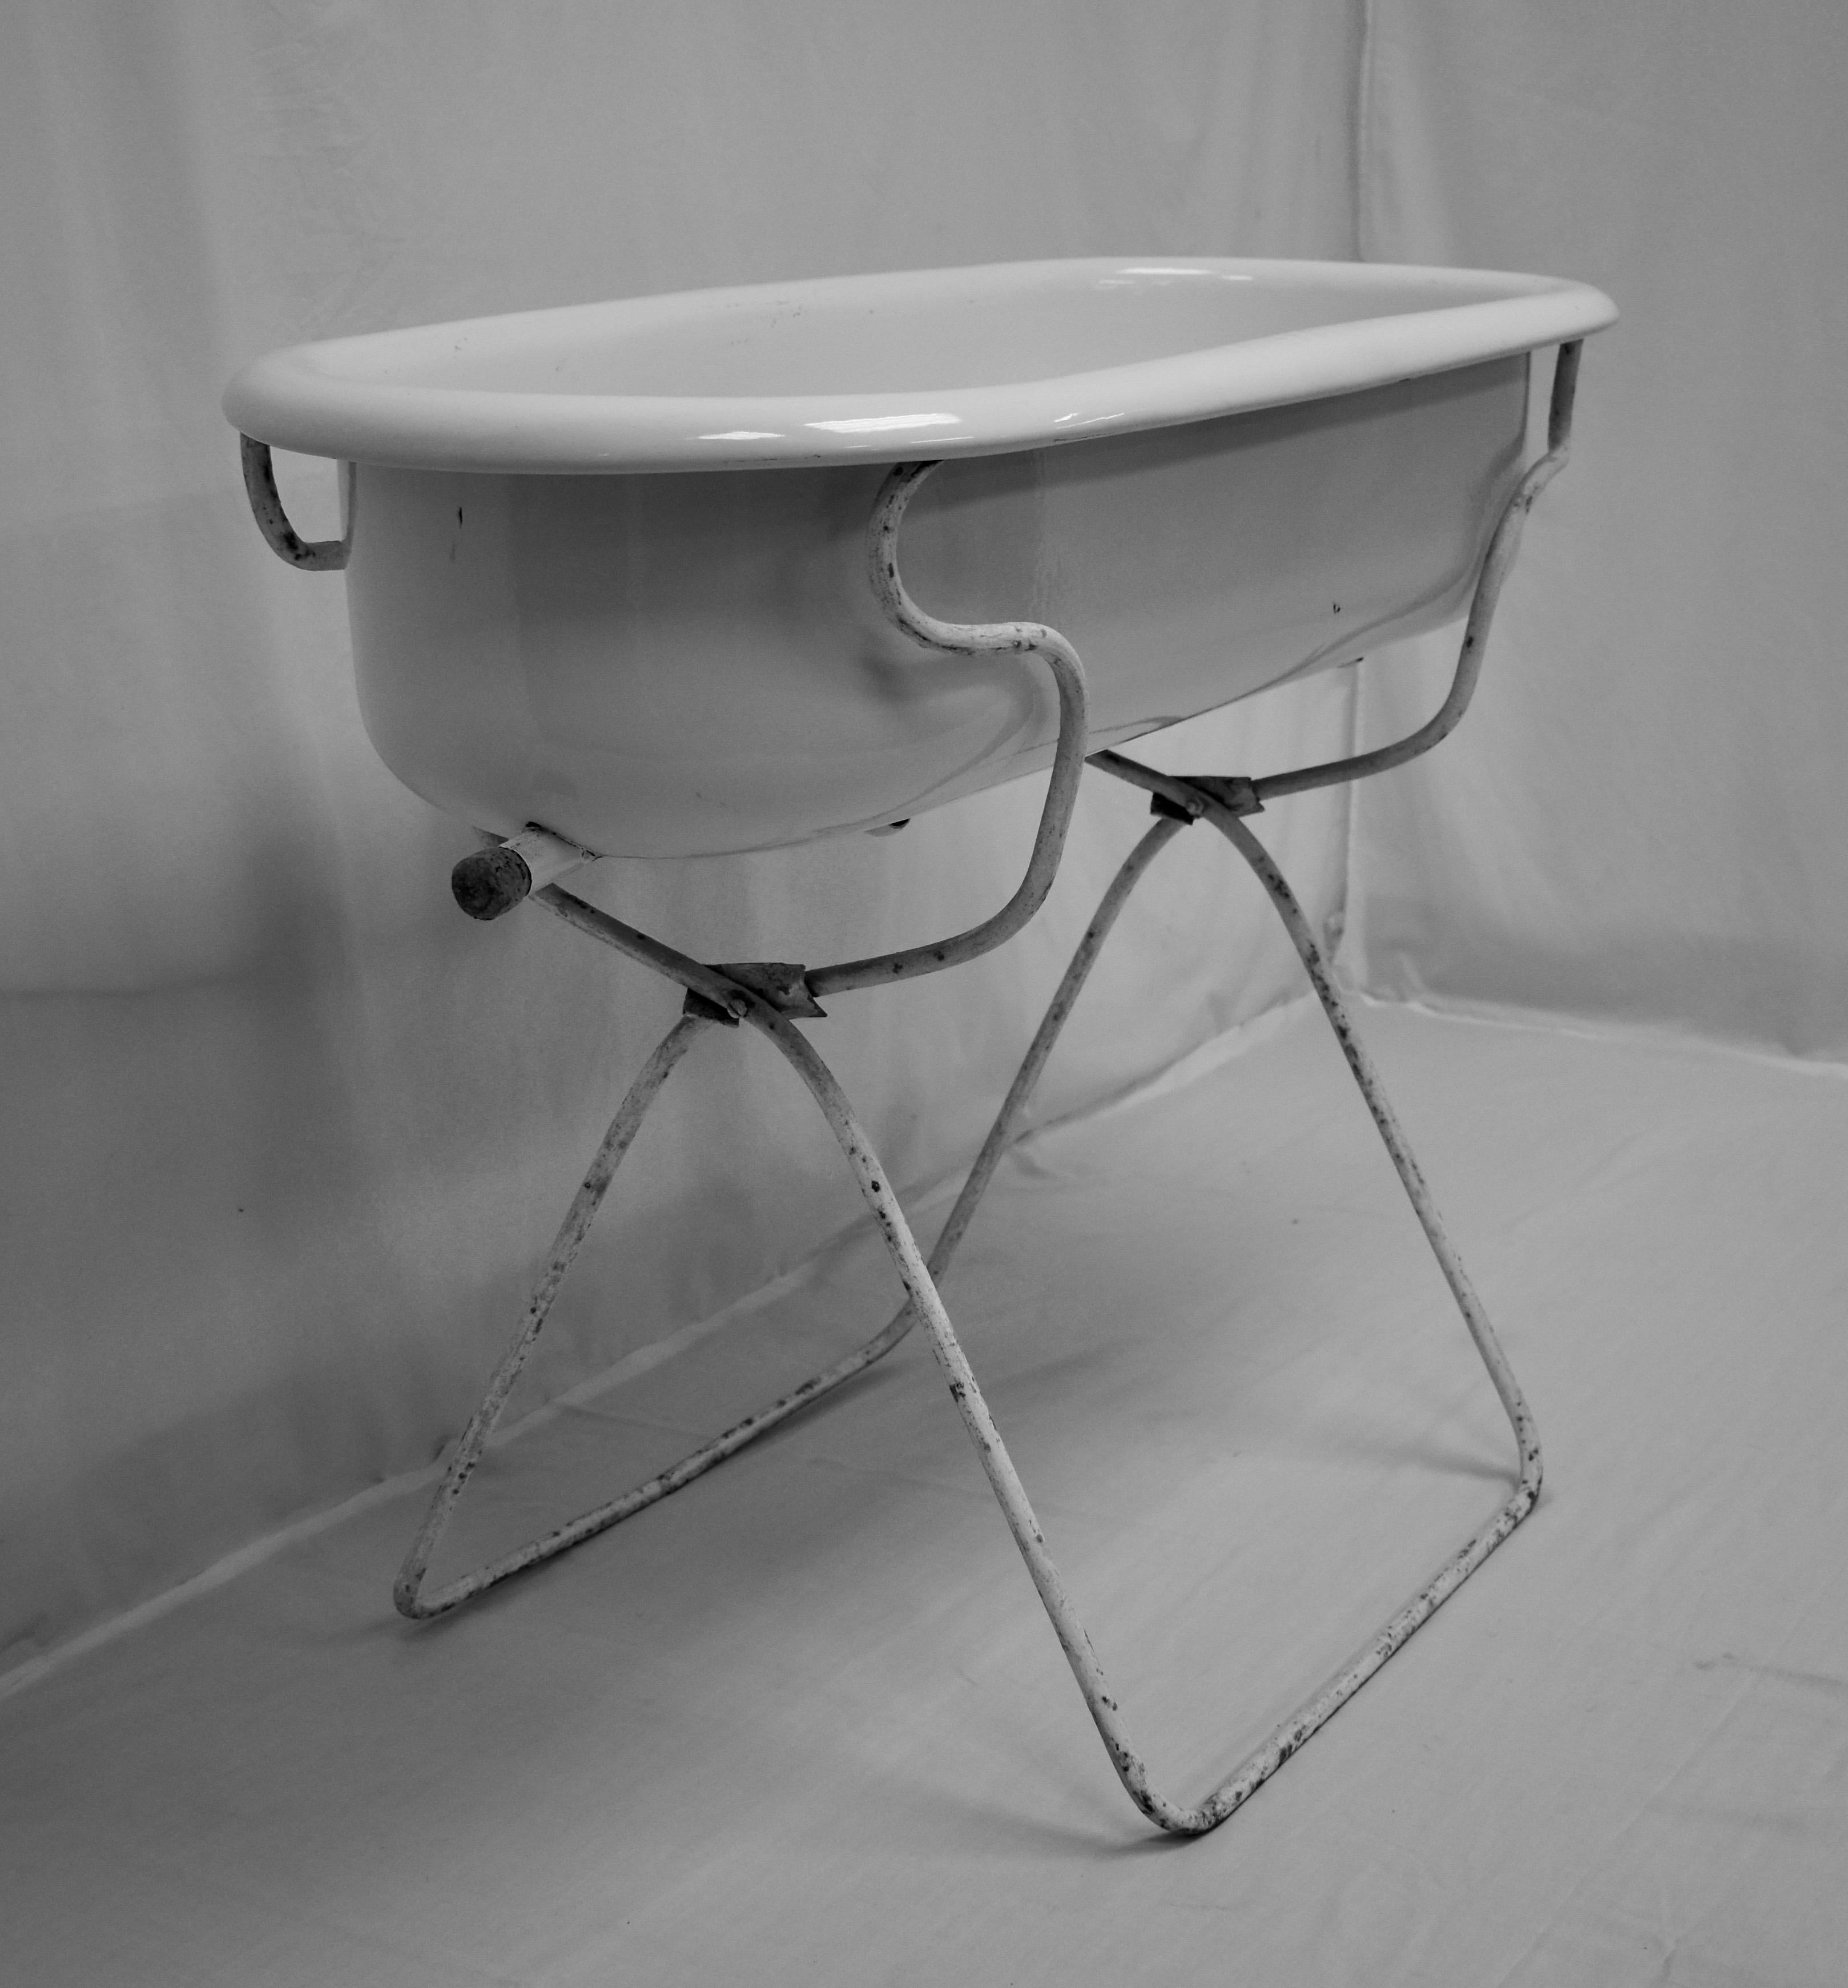 antique baby bathtub with stand